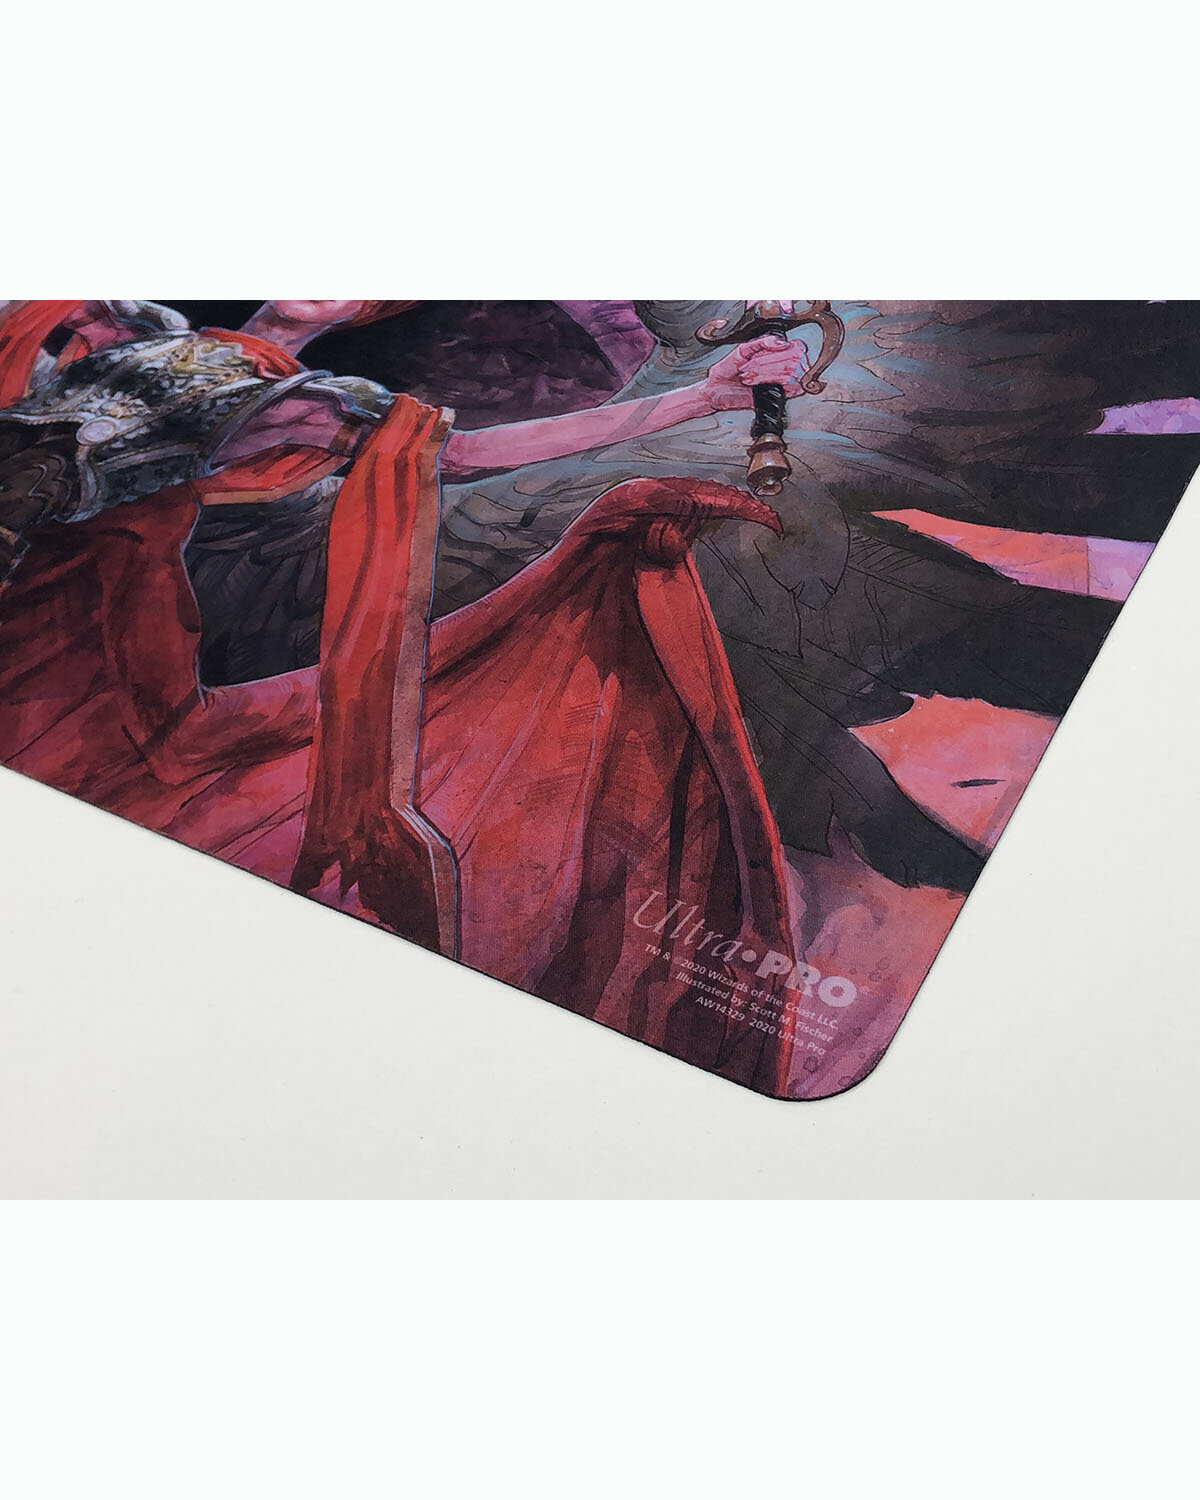 Details about   MTG Kaalia Of The Vast Playmat 14x24 Inch TCG CCG Single Player Cards Game Mat